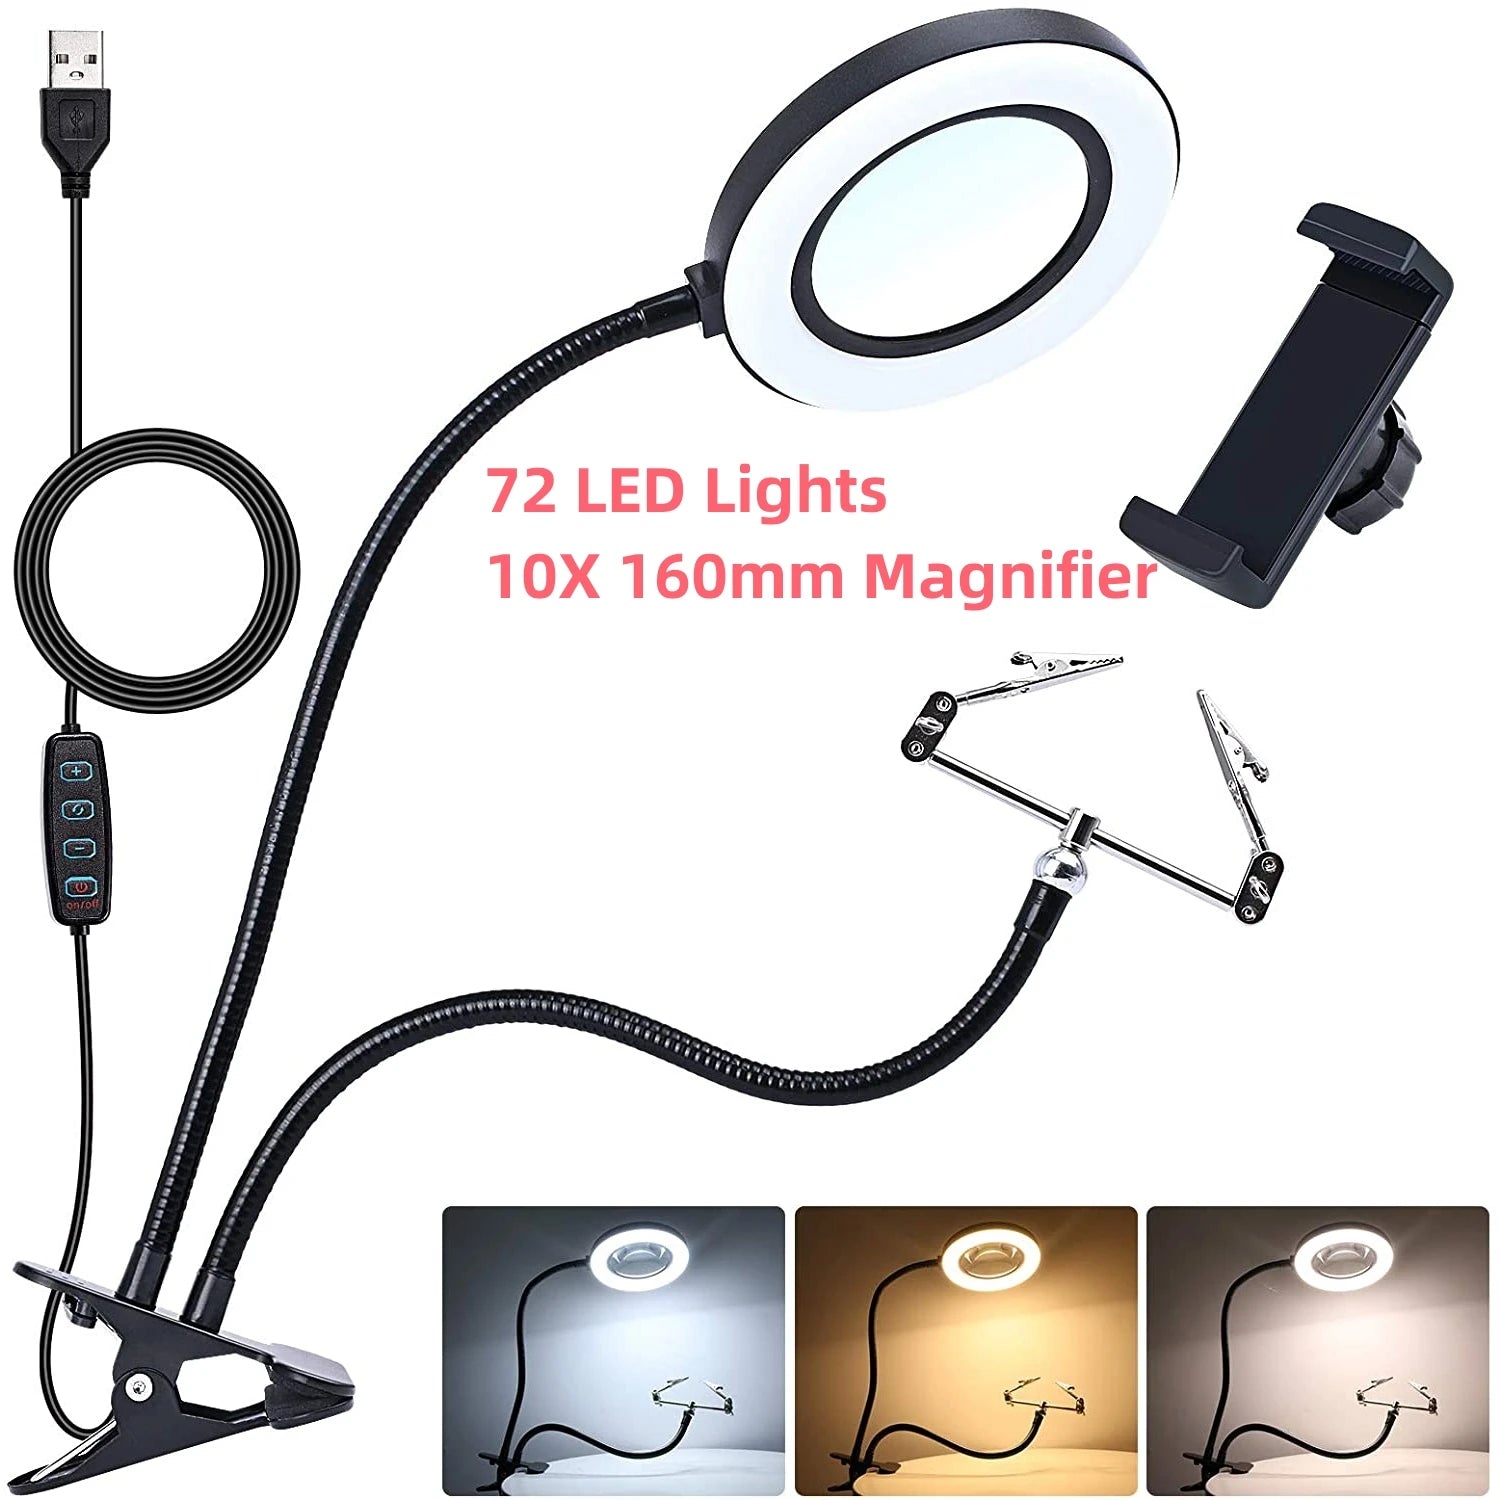 72LED 10X NEW Illuminated Magnifier USB 3 Colors LED Magnifying Glass for Soldering Iron Repair/Table Lamp/Skincare Beauty Tool